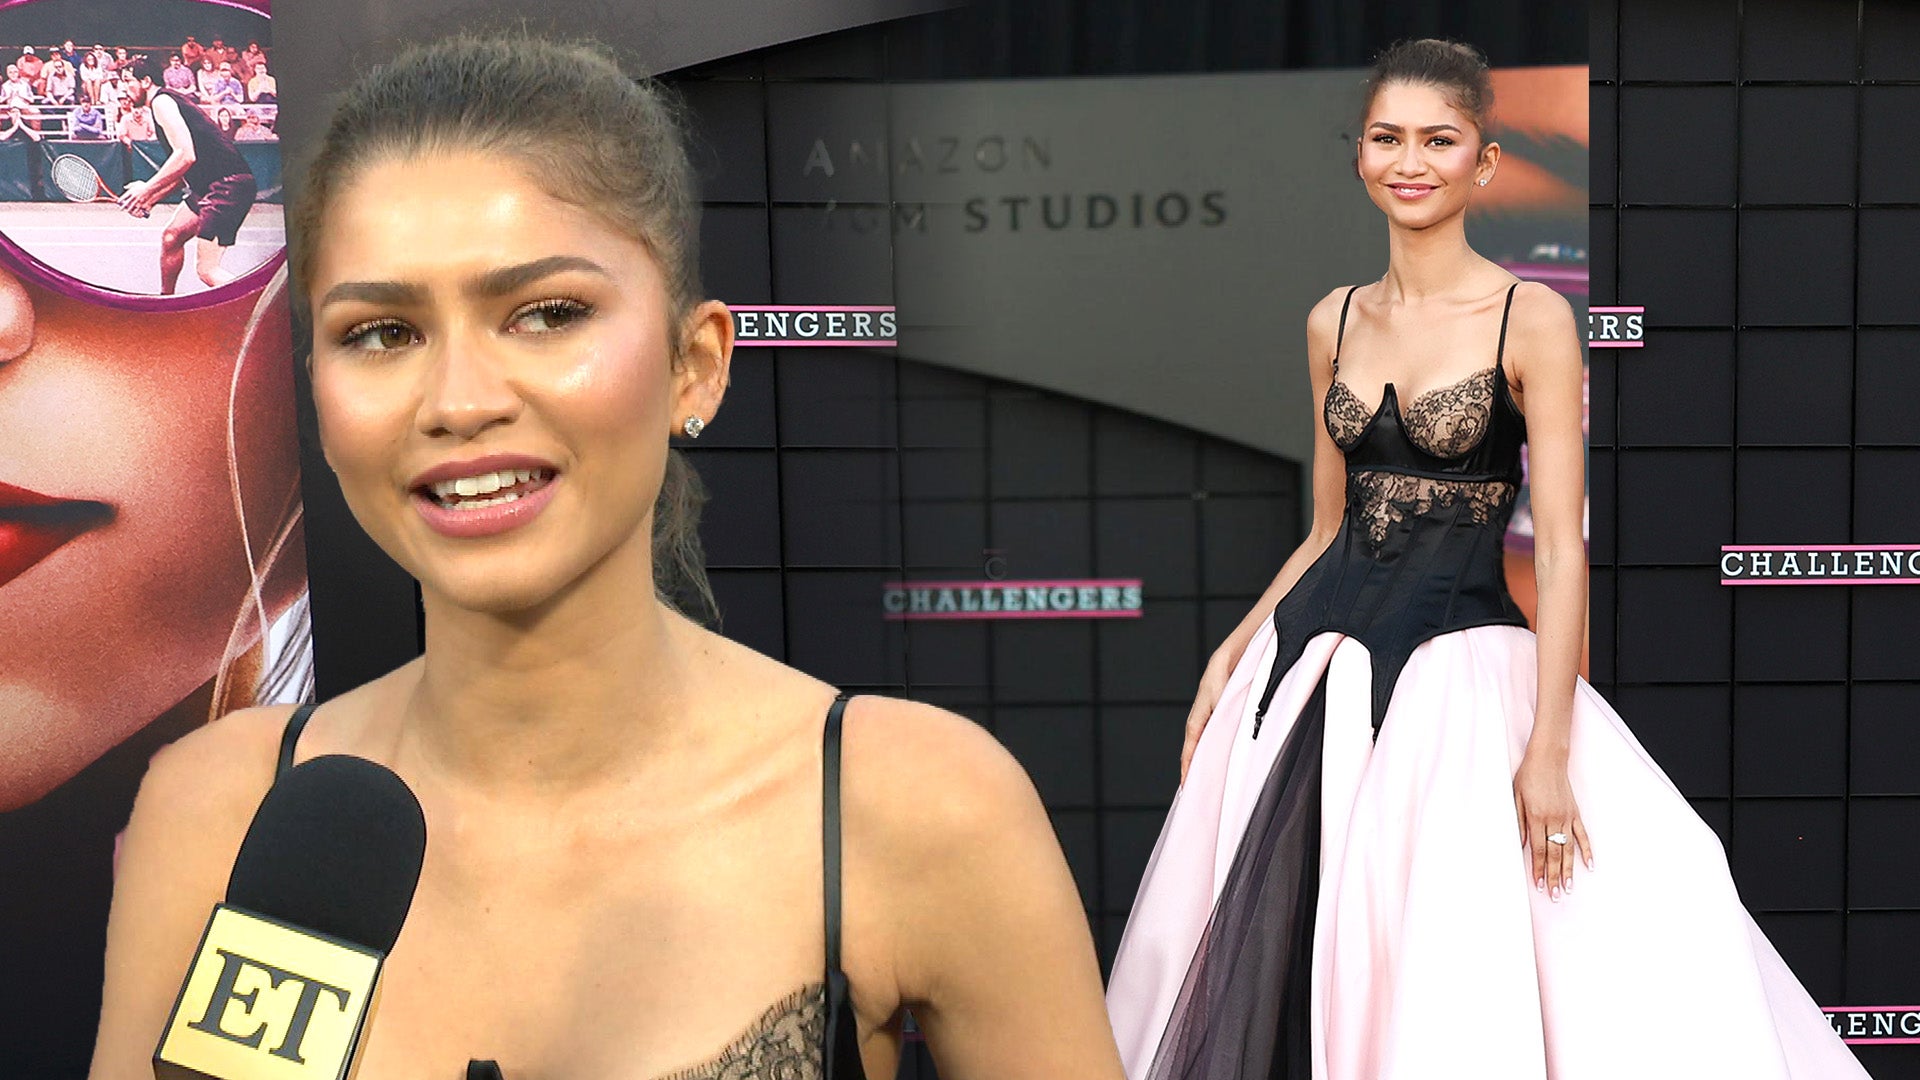 Zendaya Becomes 'Red Carpet Character' to Have Fashion Fun During 'Challengers' Press Tour